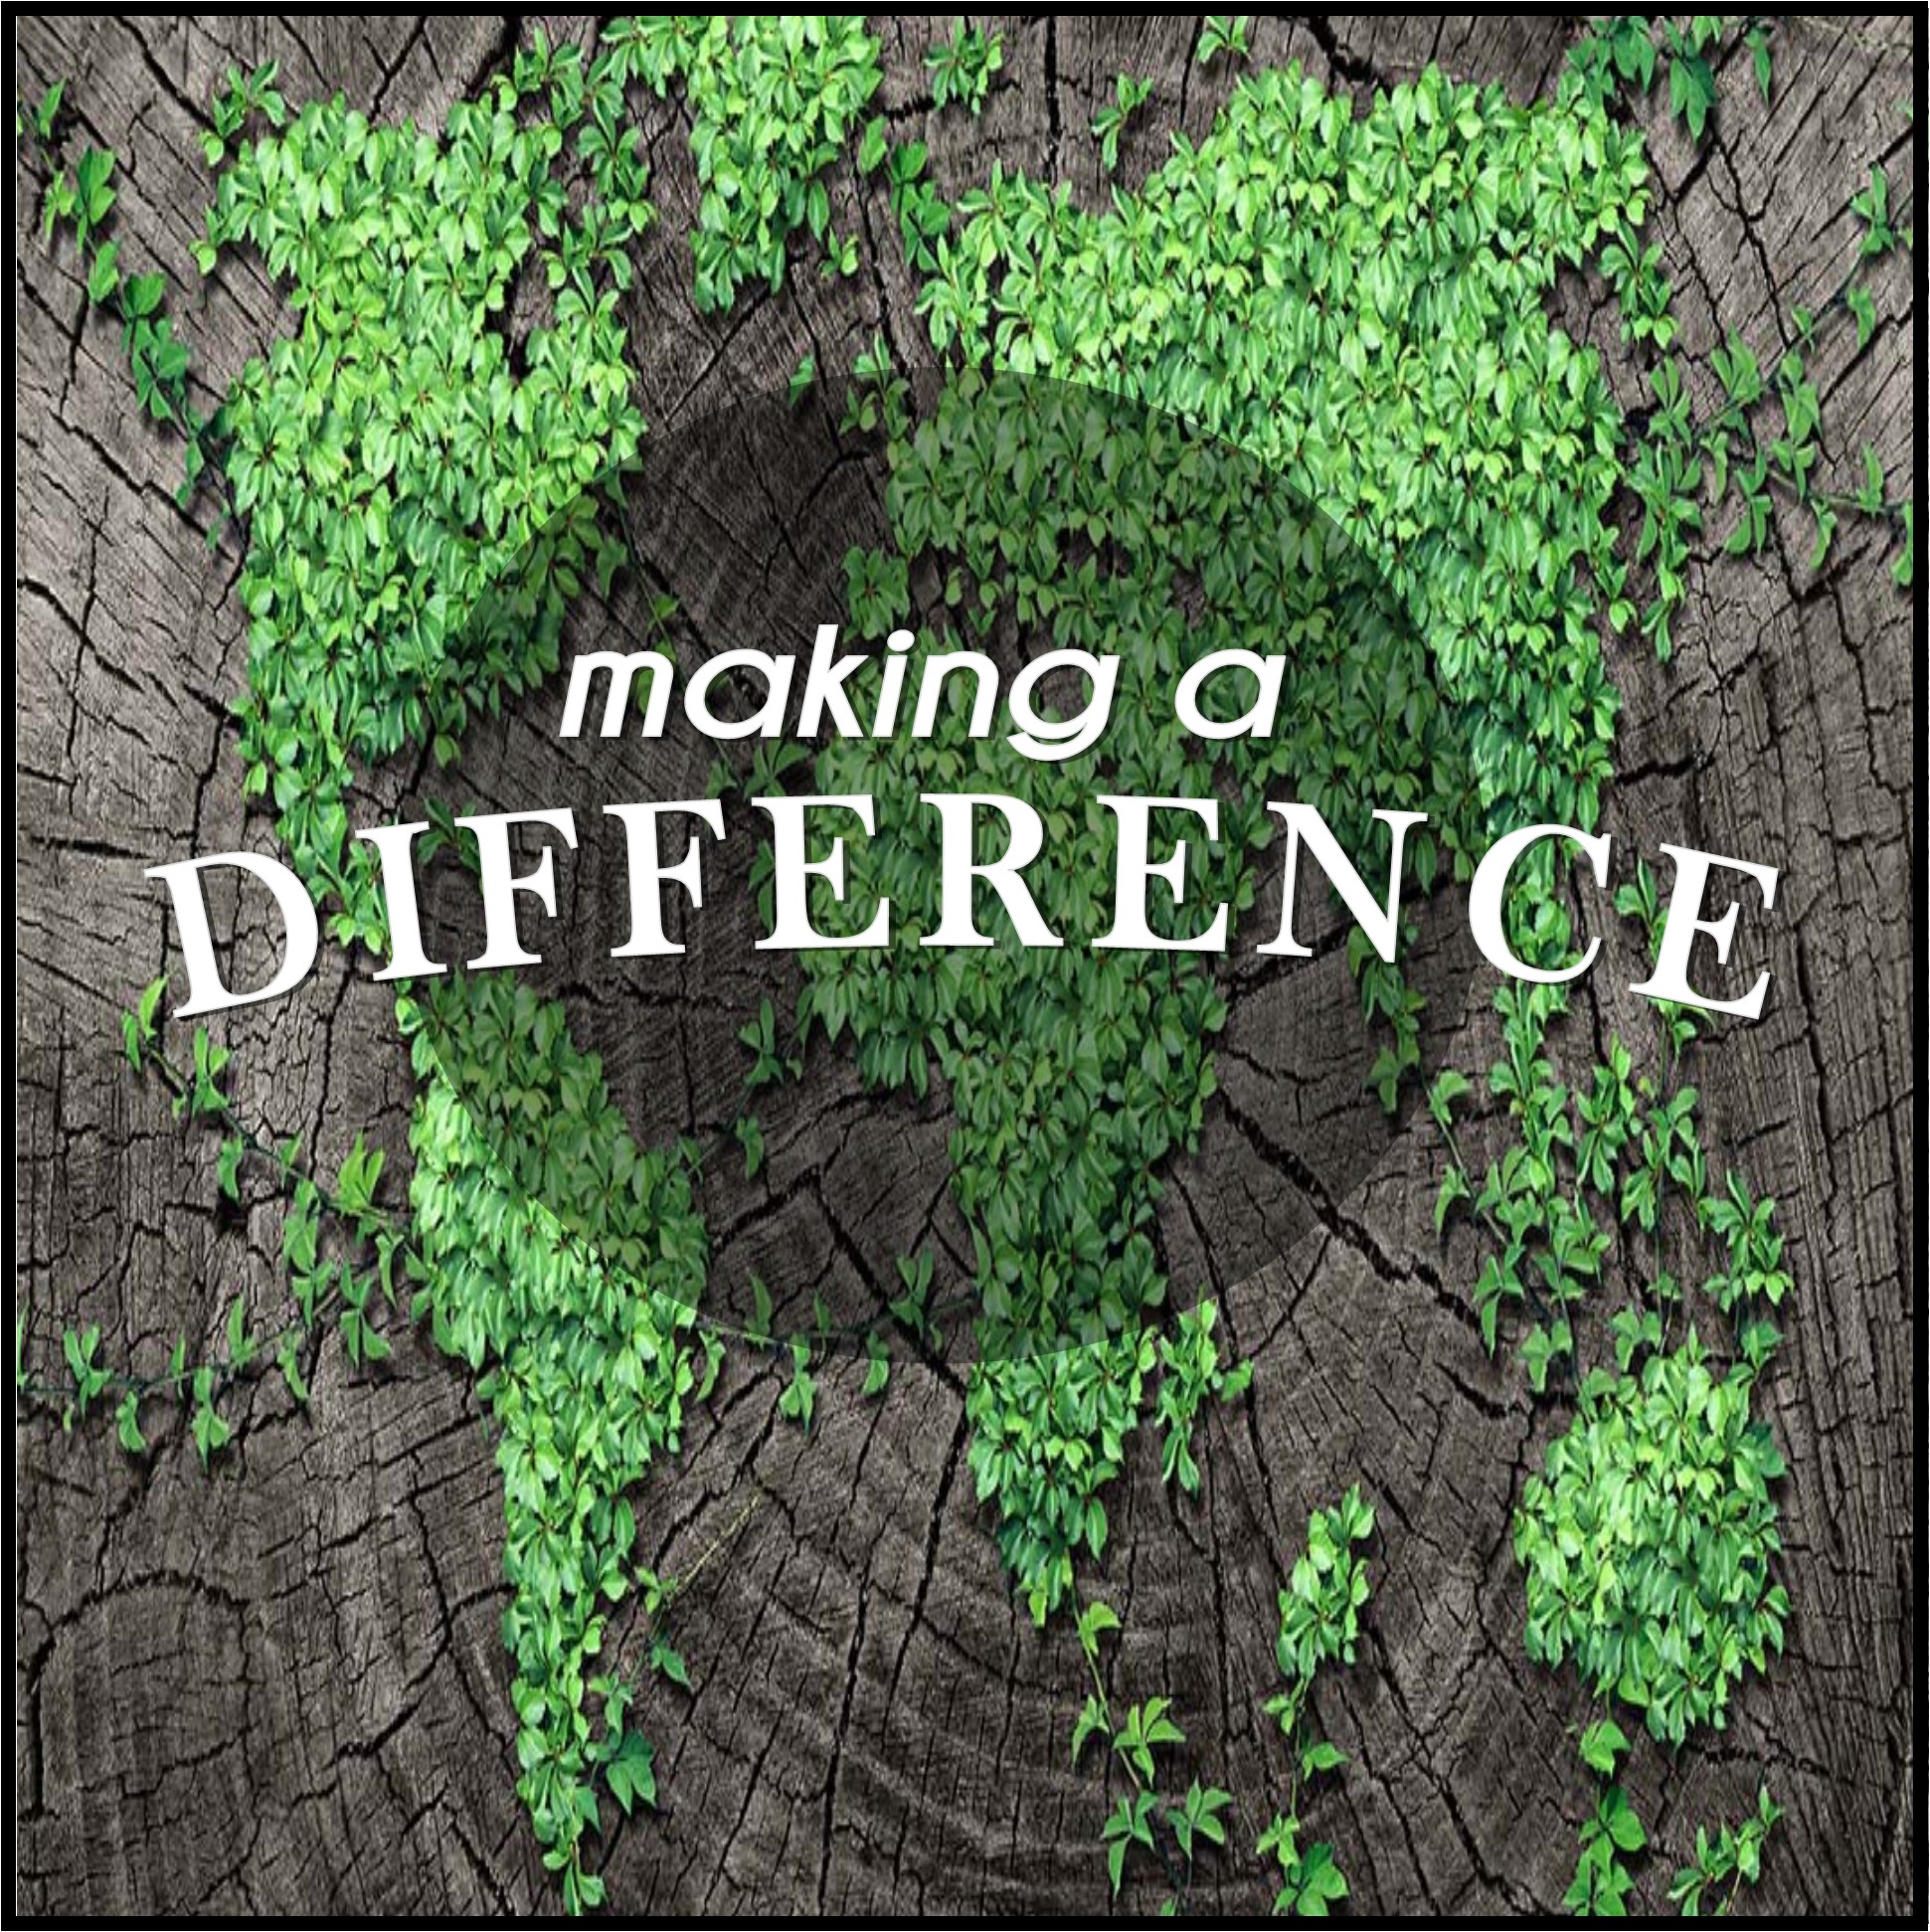 Making a difference picture 2.png.jpg